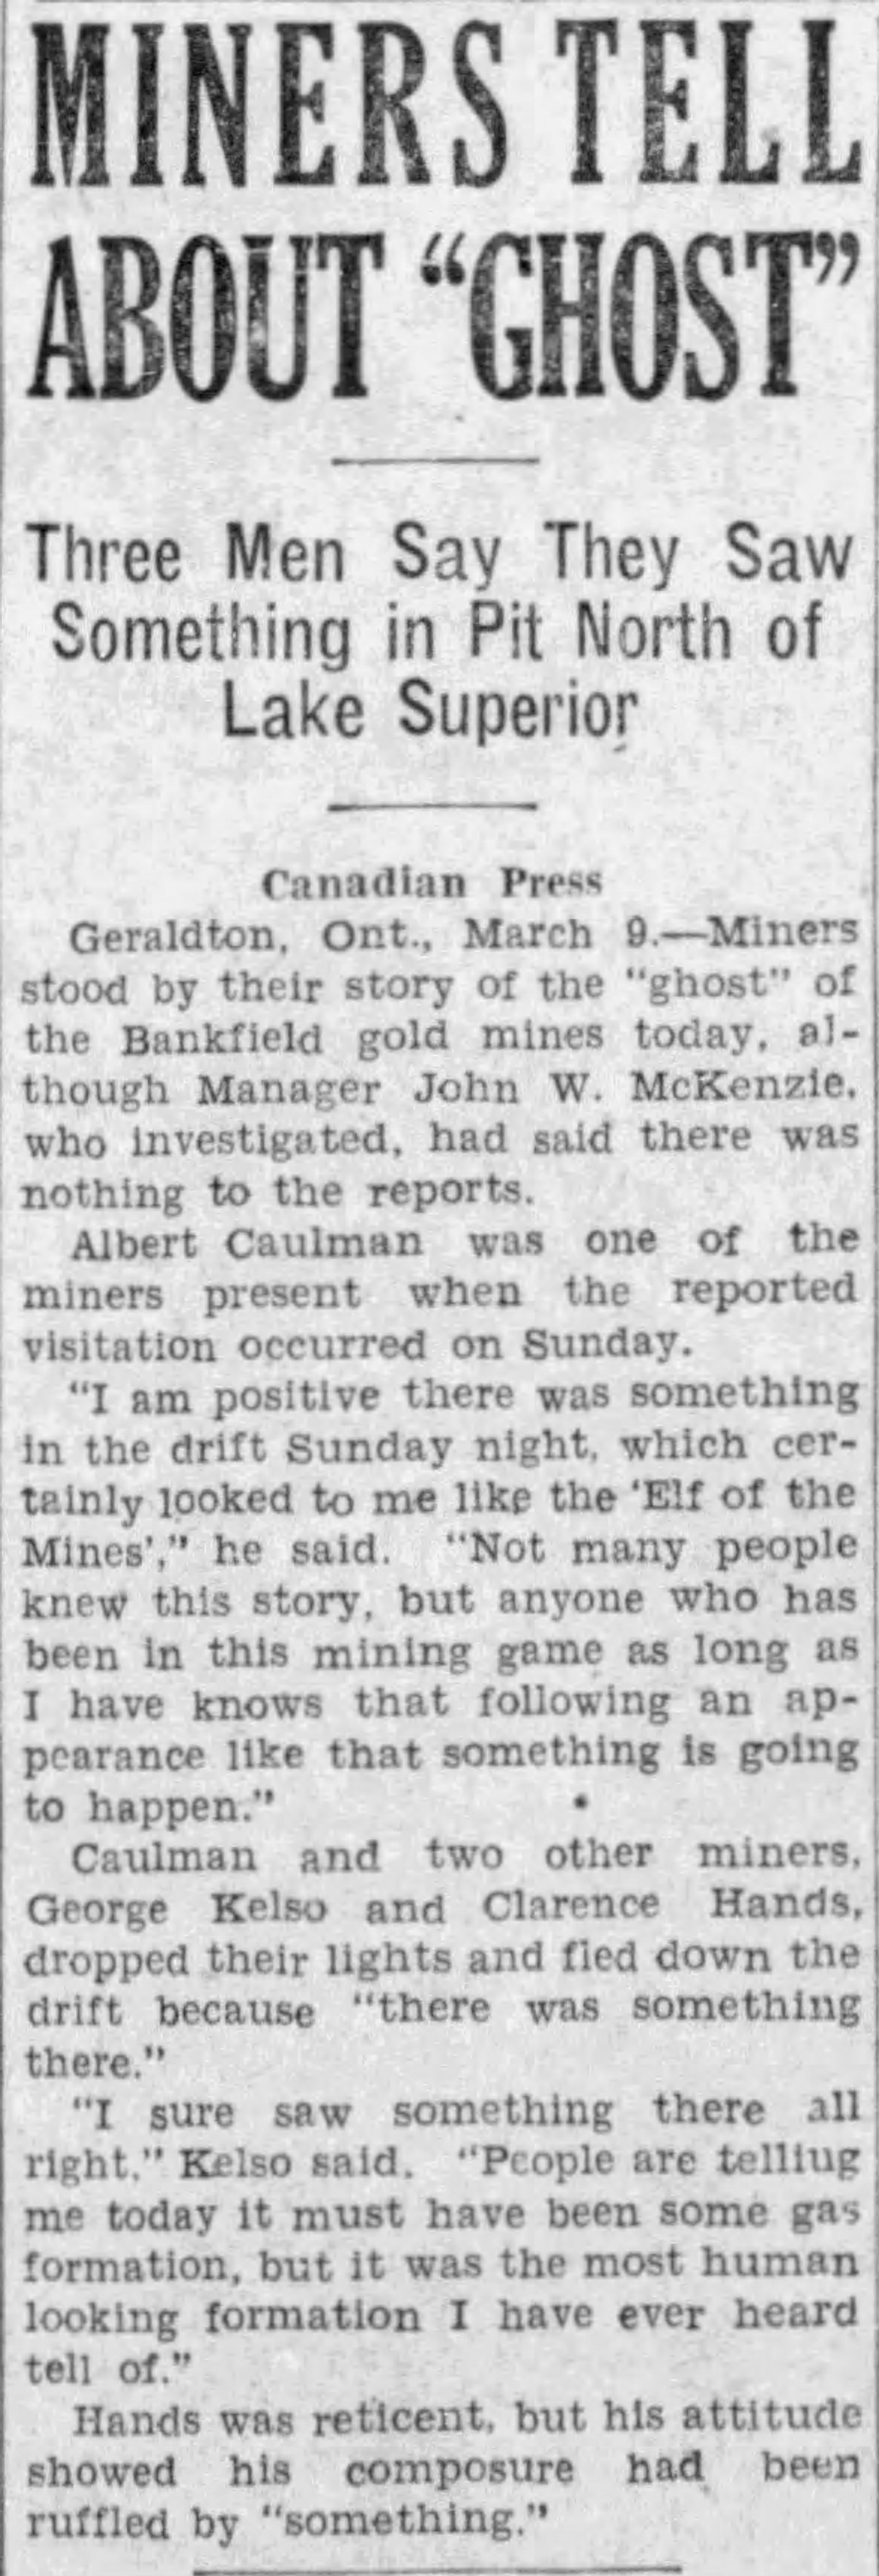 Canadian Press Clipping - Miners Tell About "Ghost"